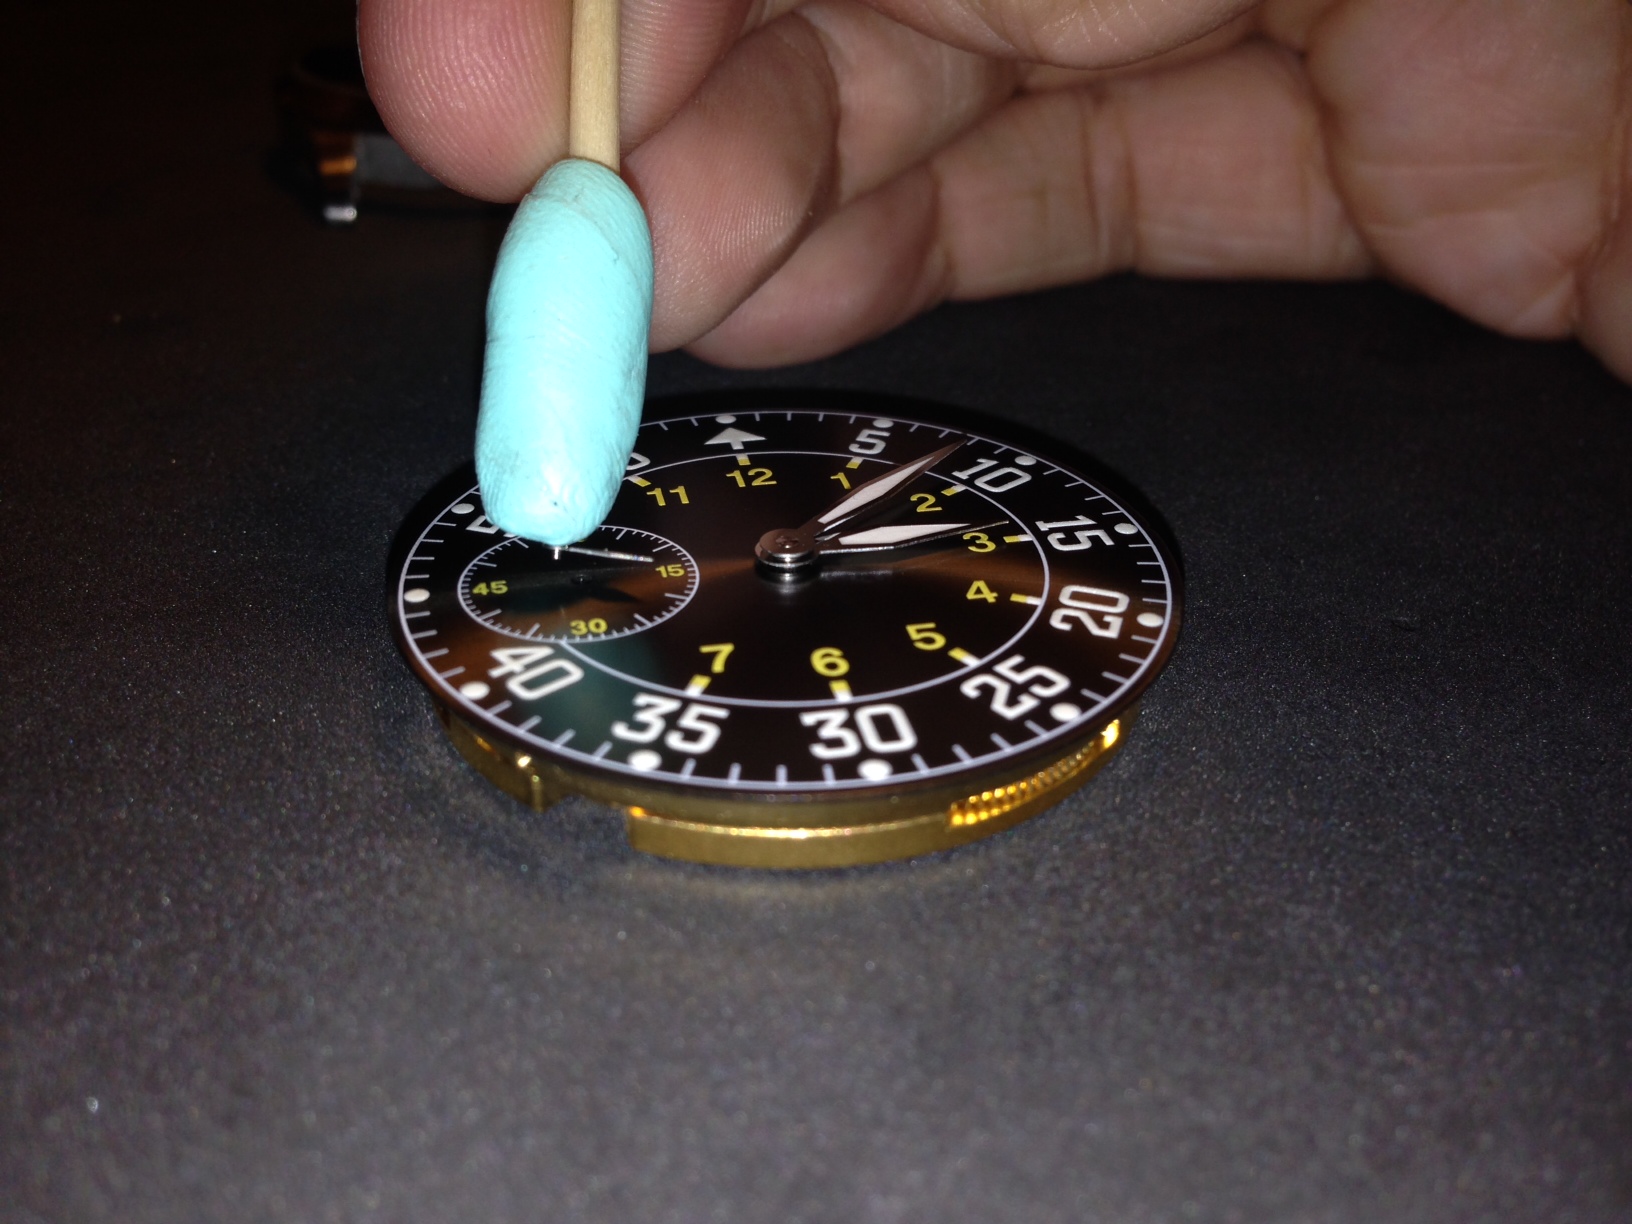 How to build your own mechanical watch - second hand pinion